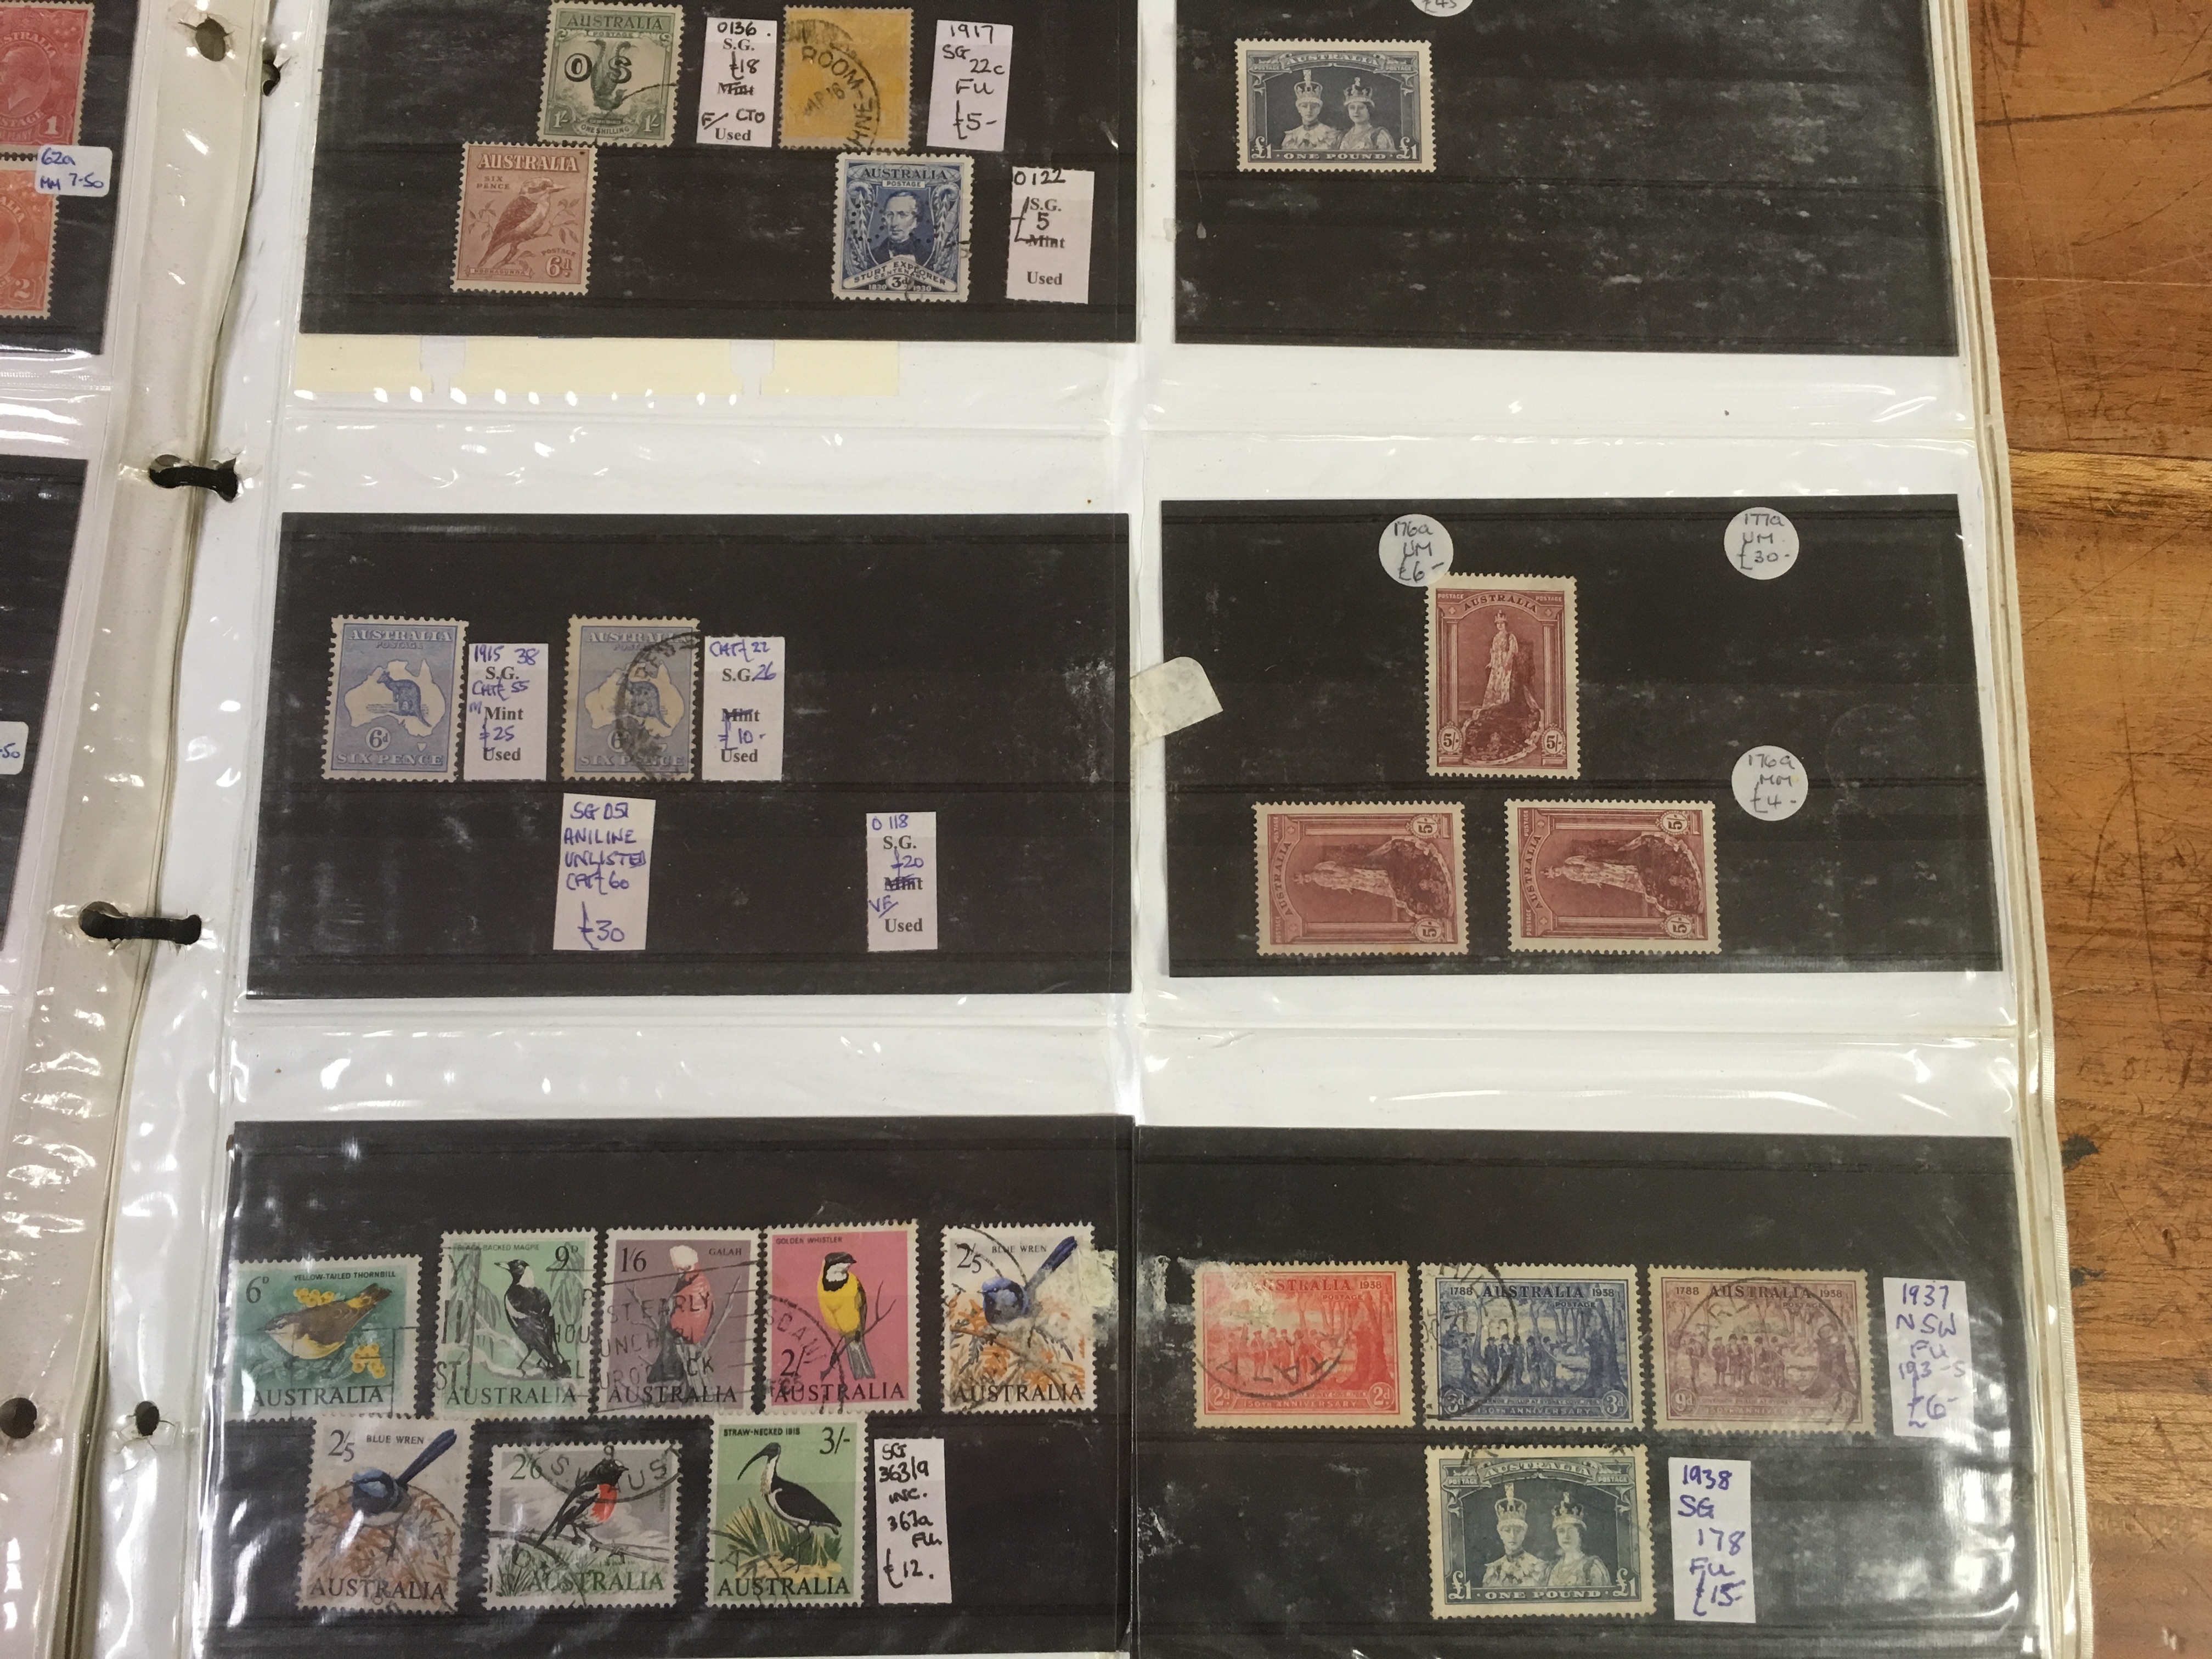 AUSTRALIA: EX DEALER'S STOCK OF SETS AND SINGLES ON PAGES, - Image 6 of 10